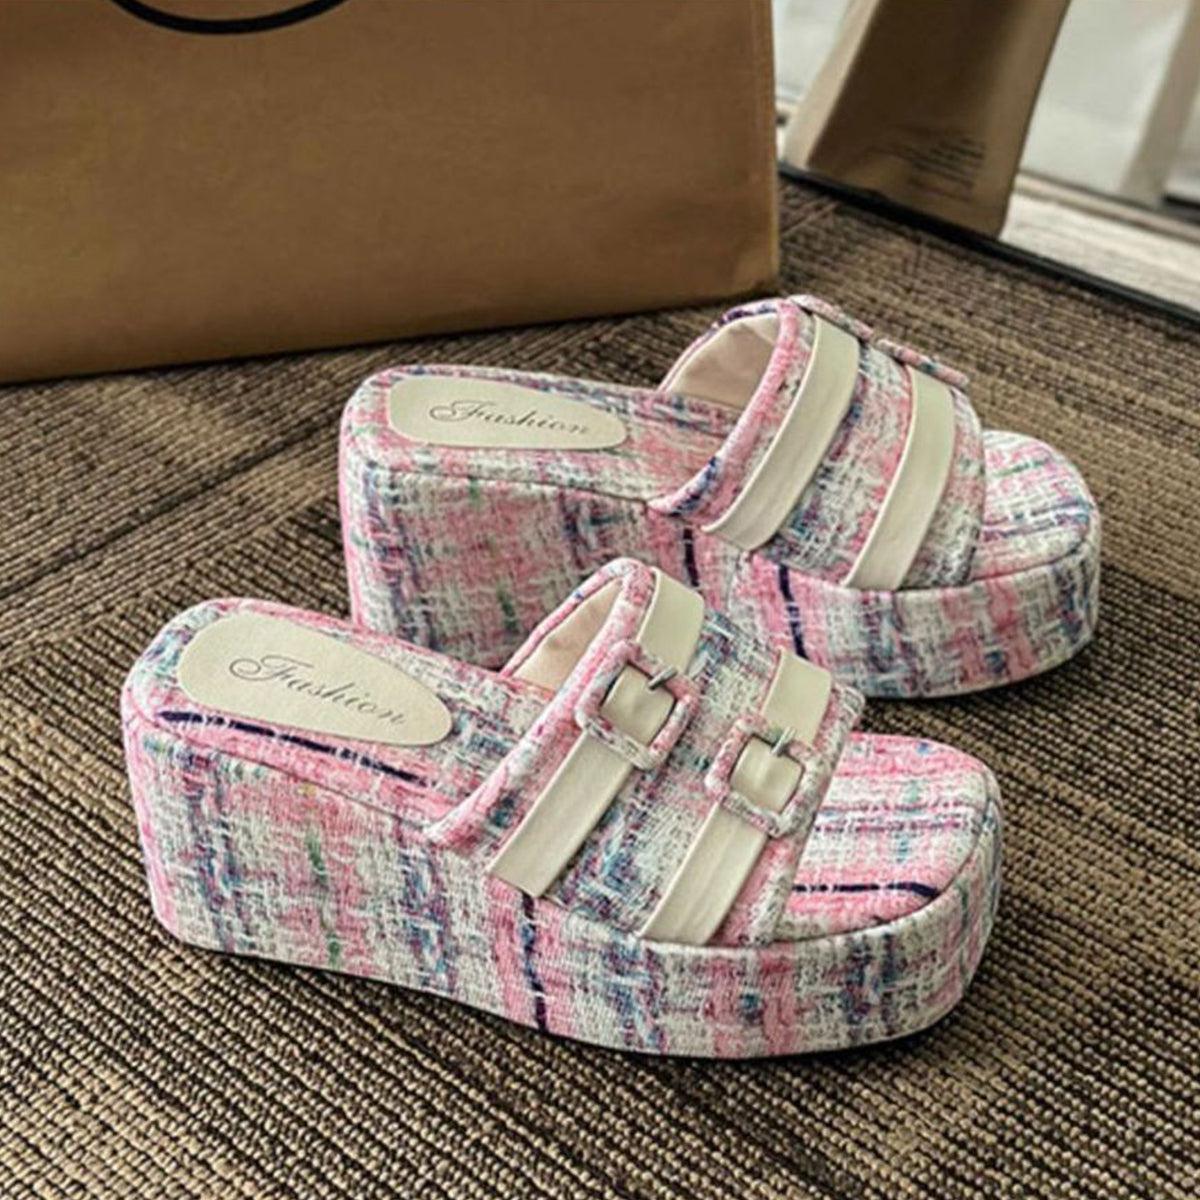 a pair of pink and white shoes sitting on top of a rug